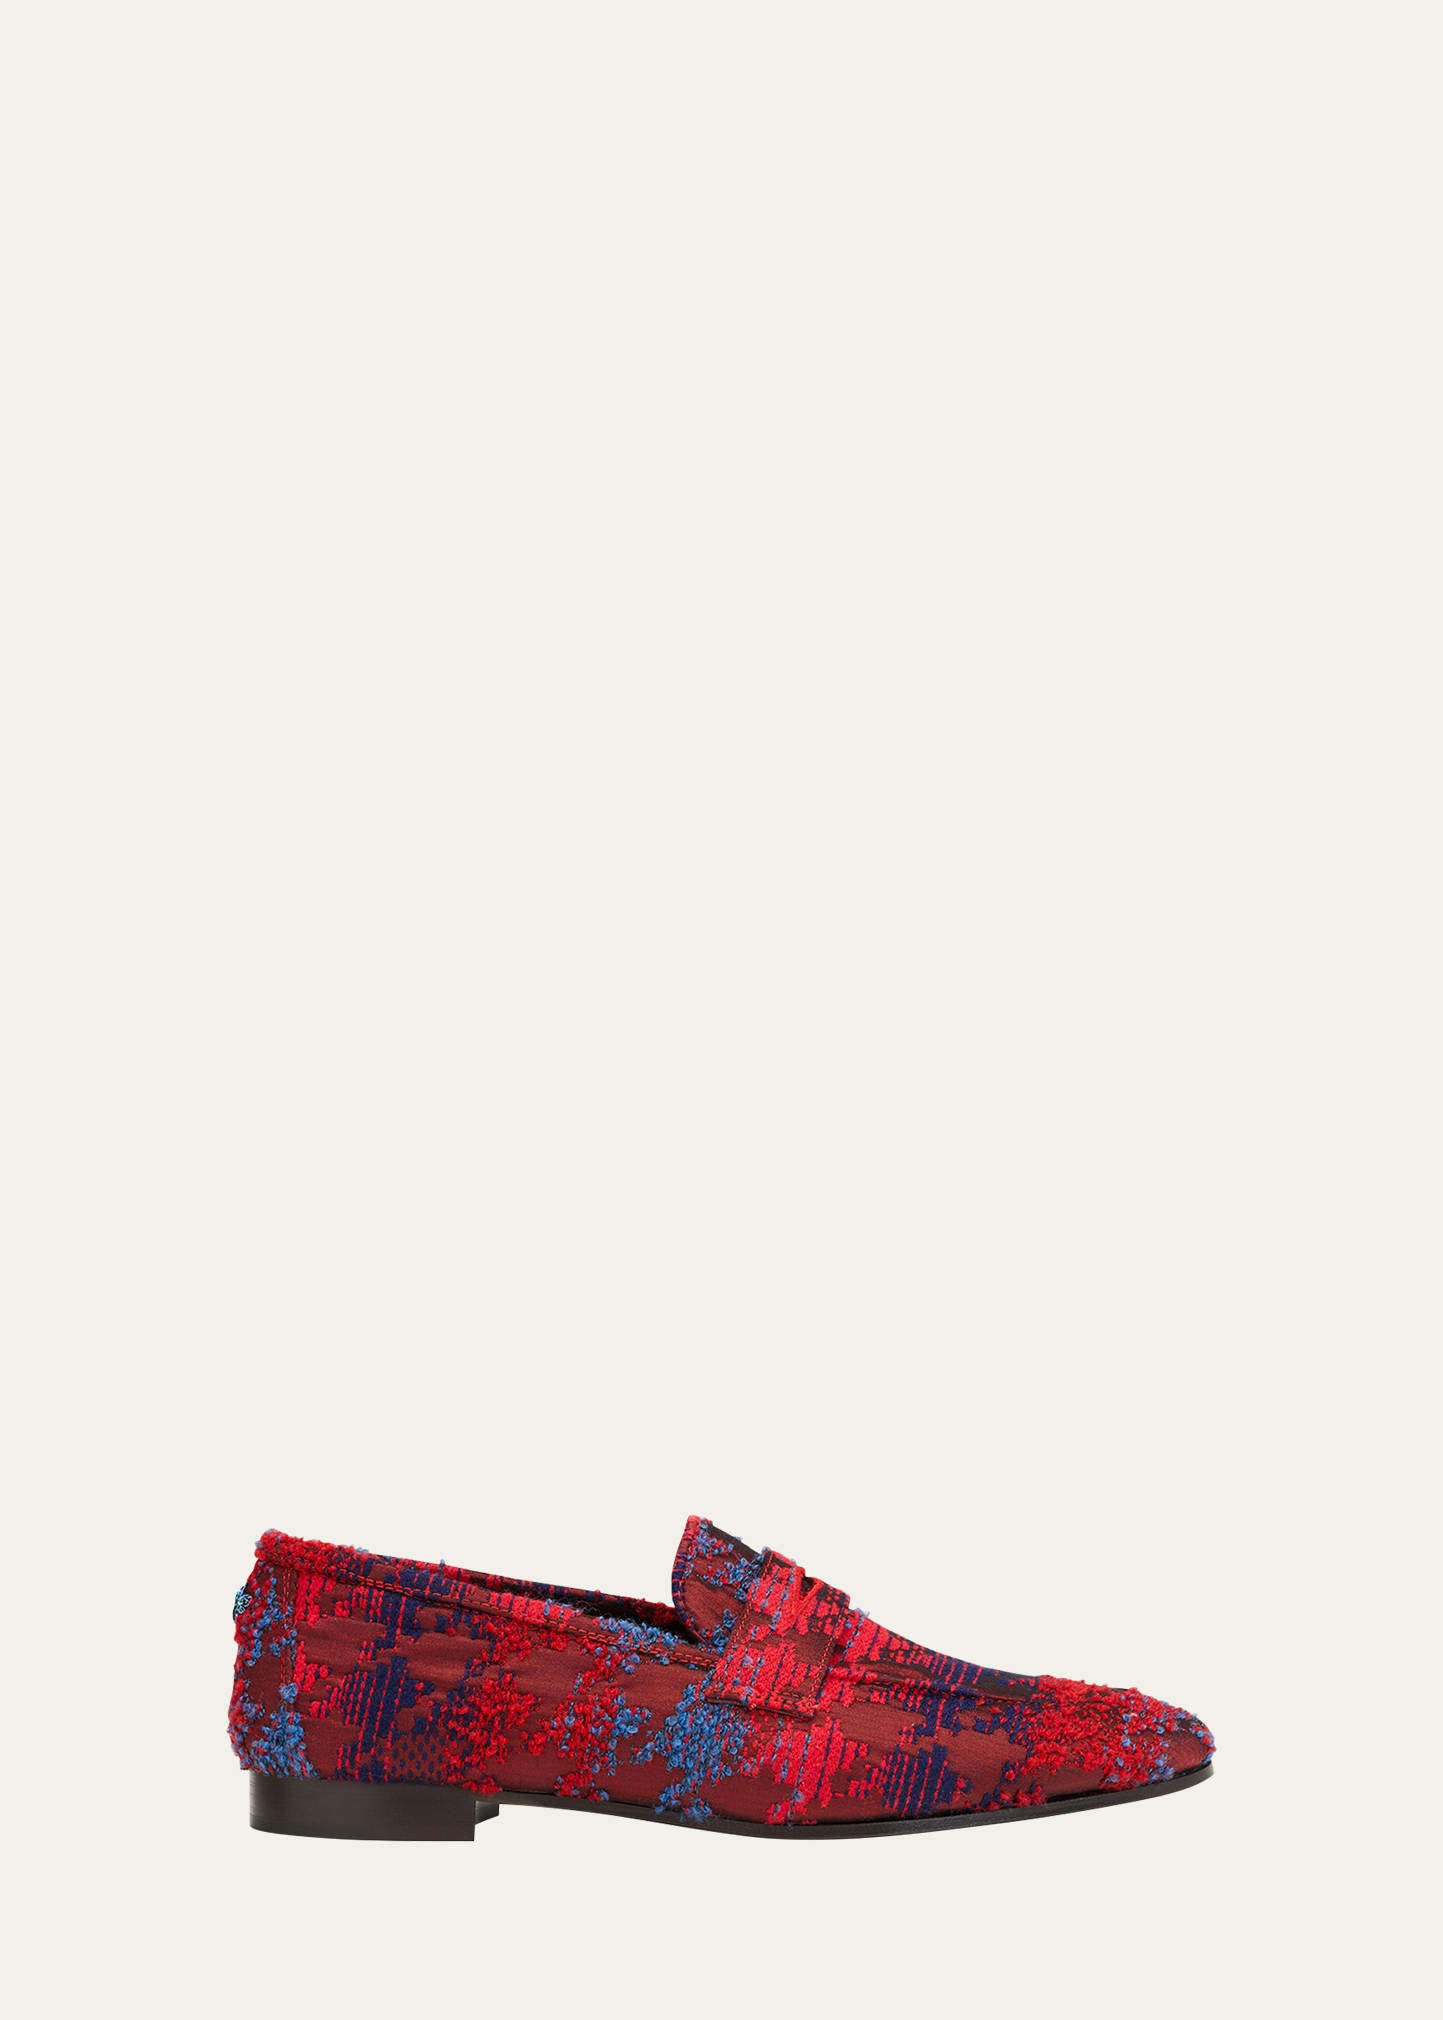 Bougeotte Flaneur Poule Penny Loafers In Red Blue 787